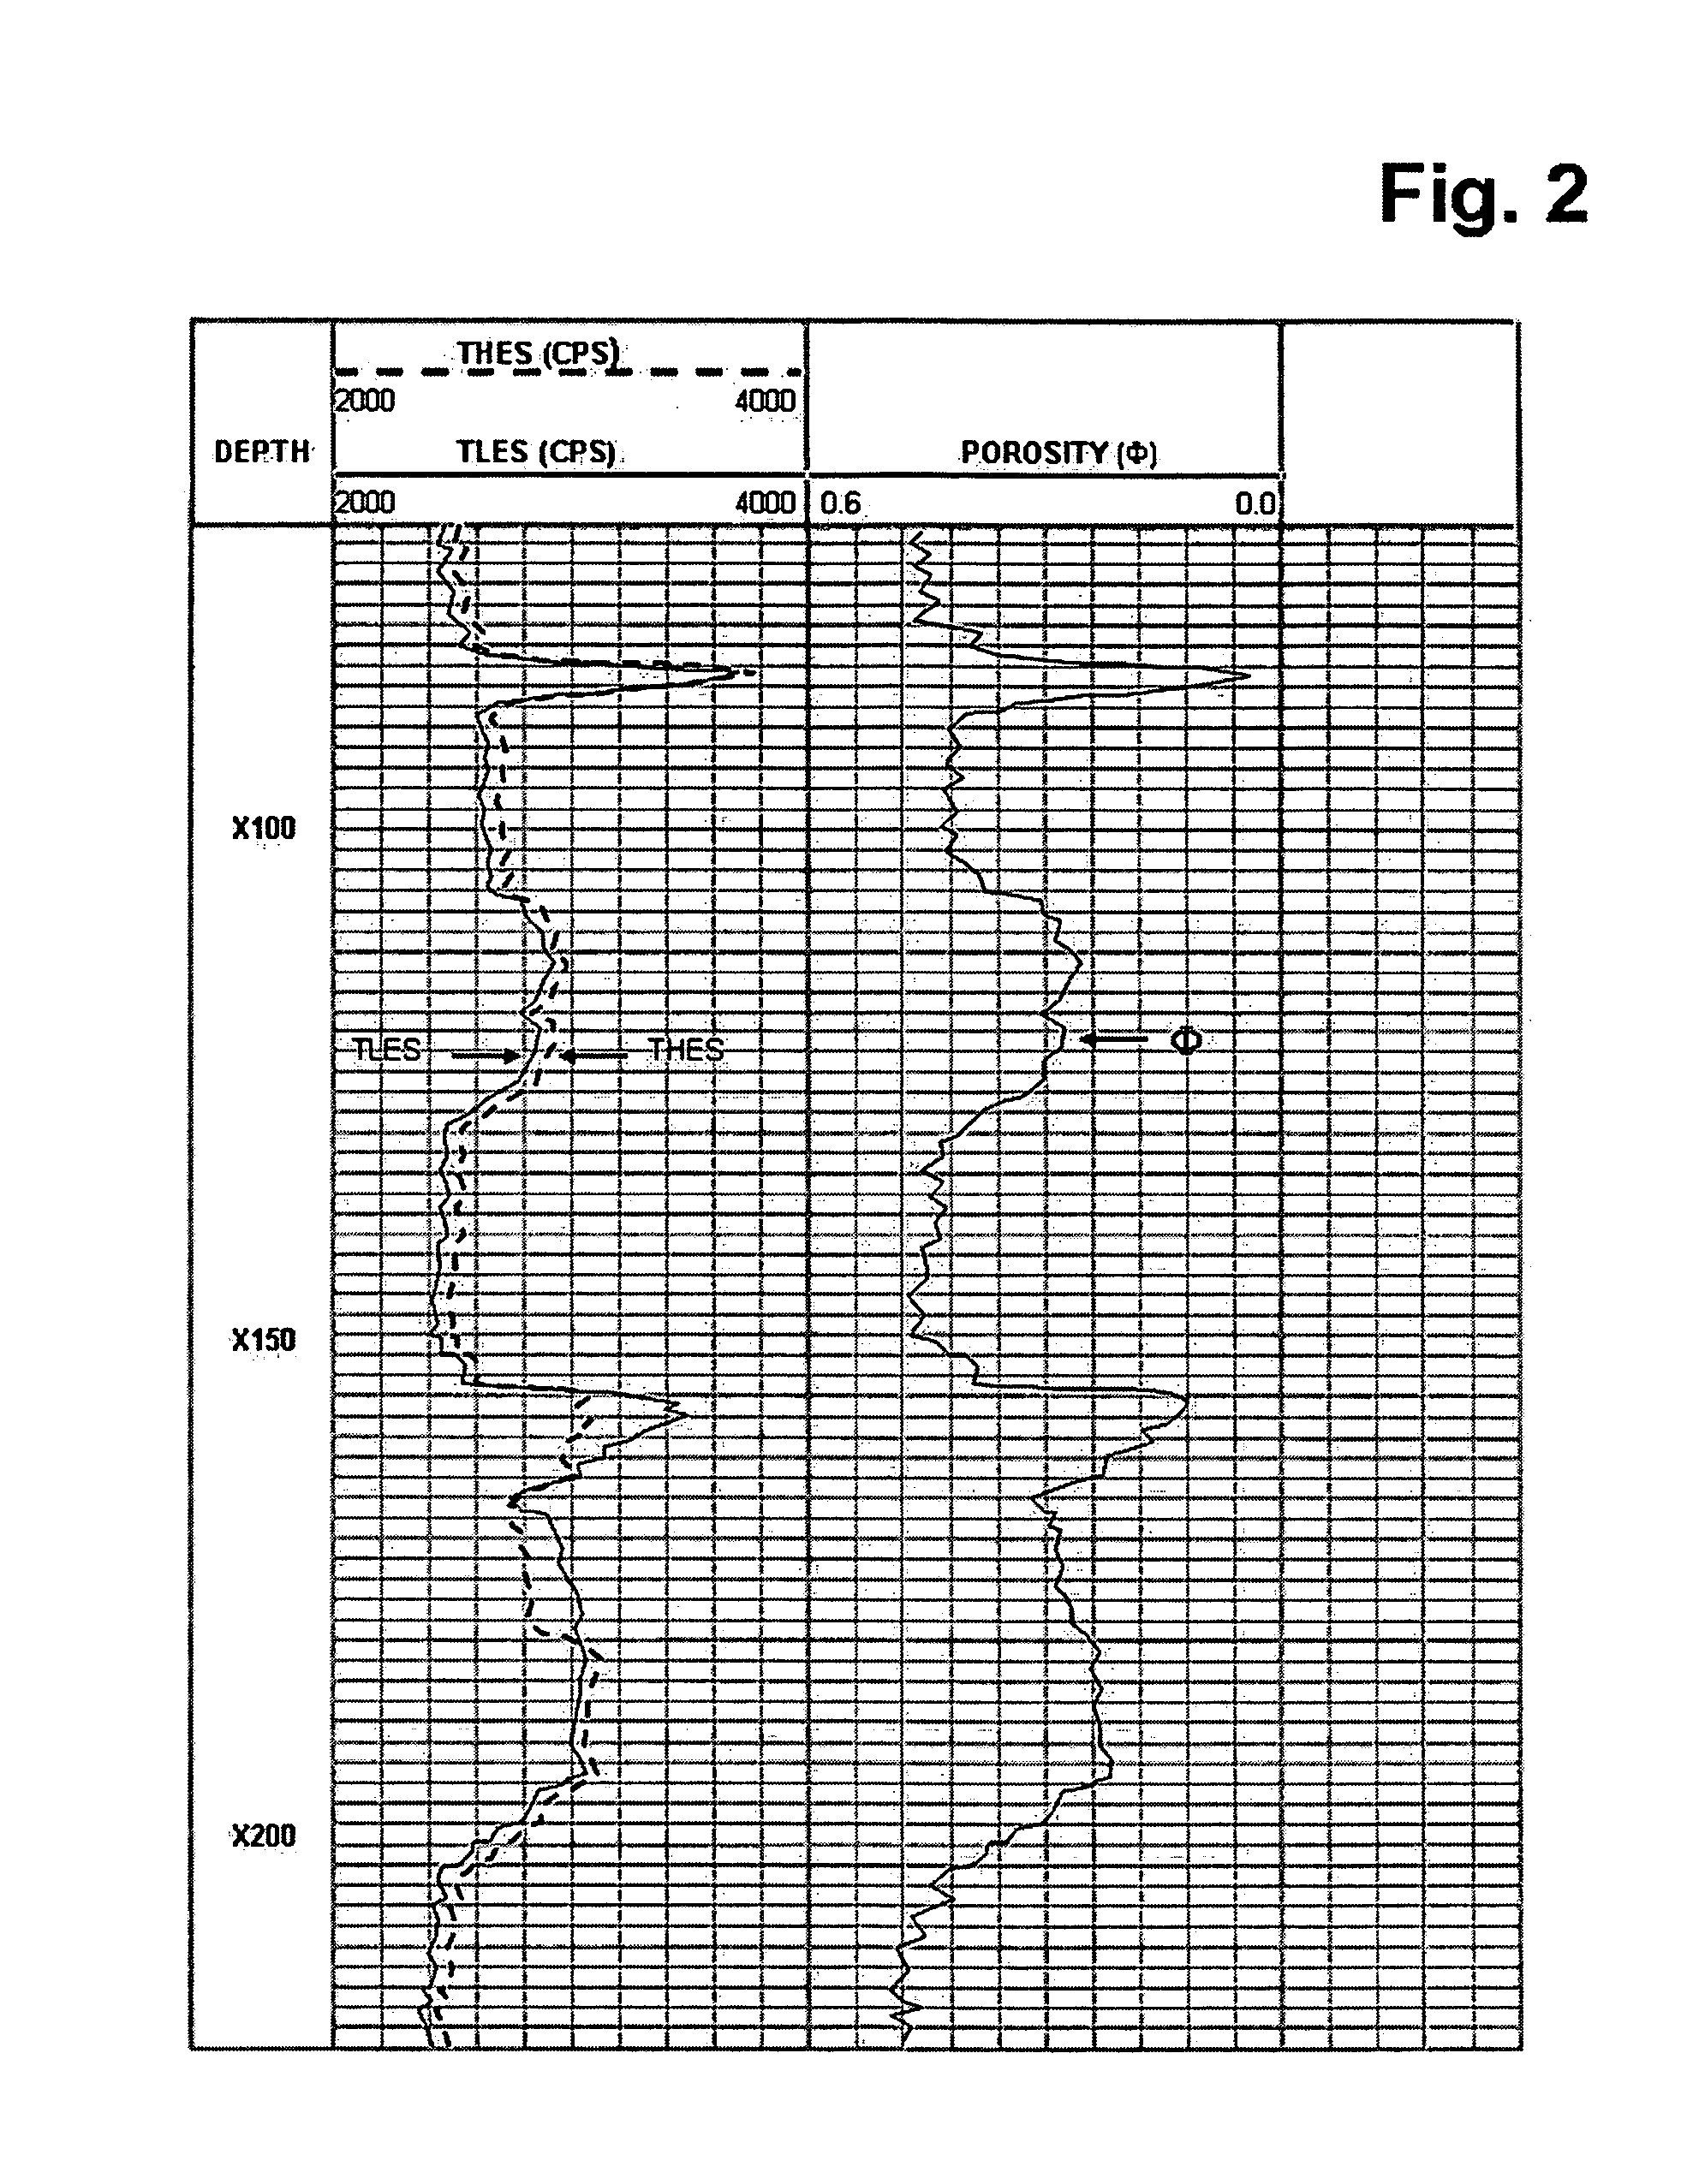 Irradiated formation tool (IFT) apparatus and method